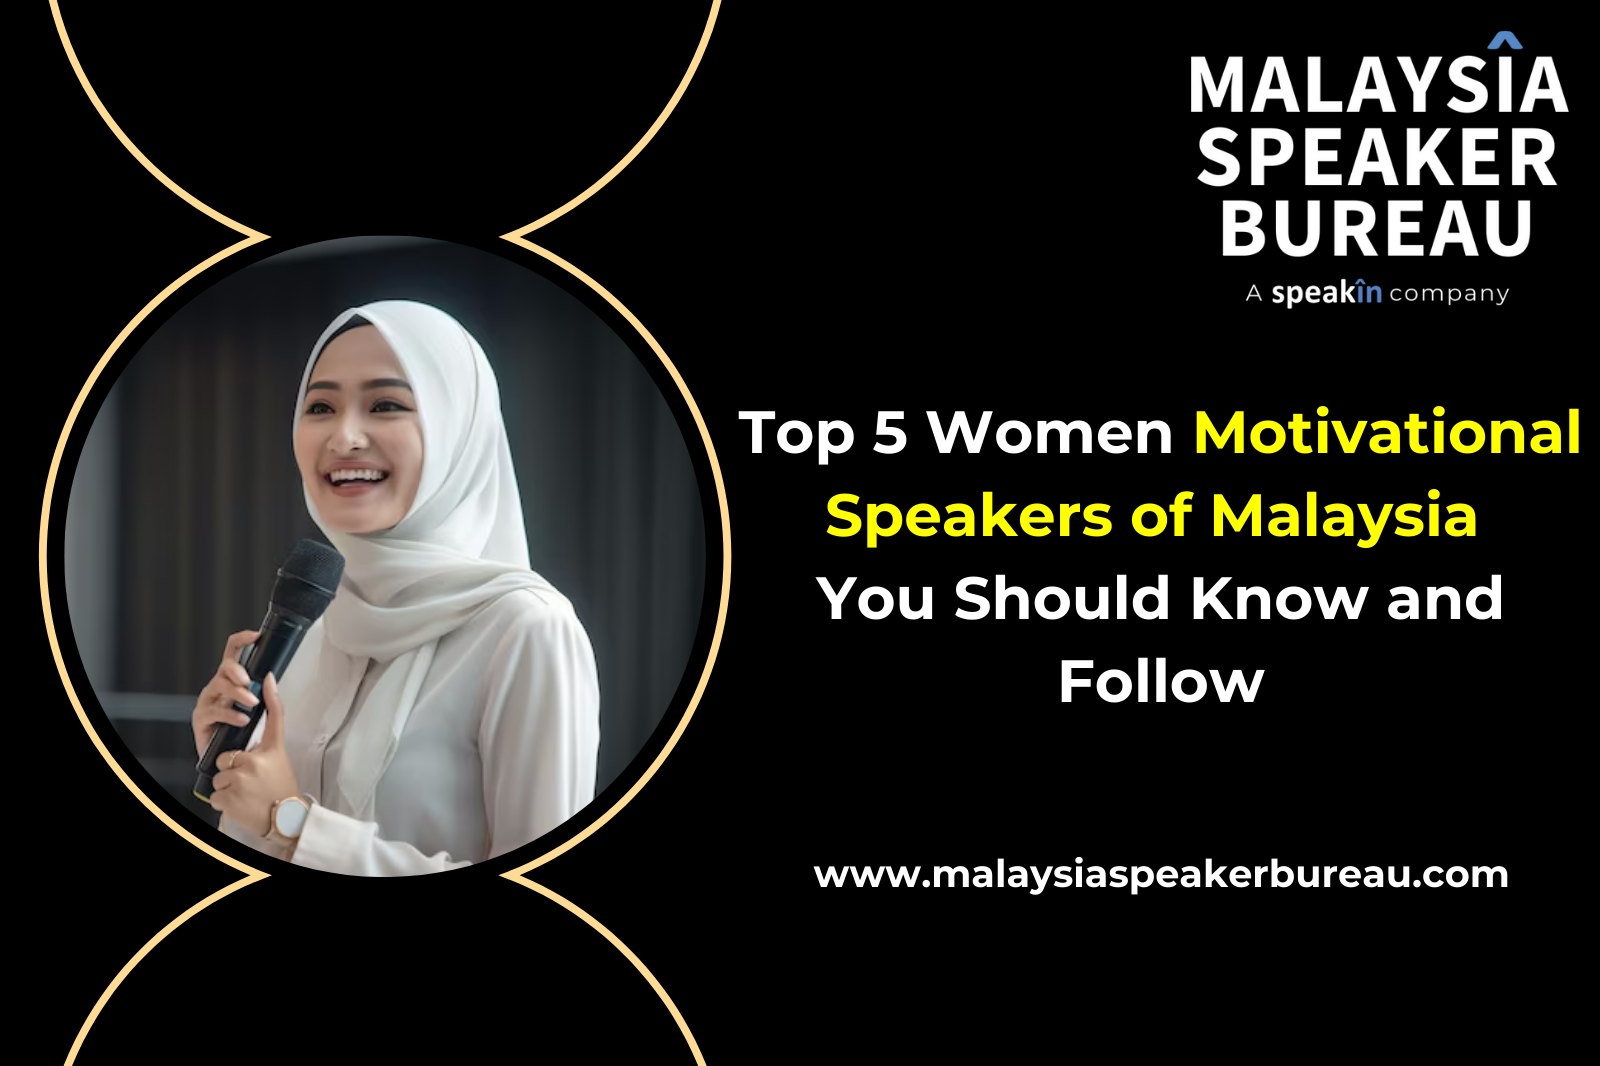 Top 5 Women Motivational Speakers of Malaysia You Should Know and Follow